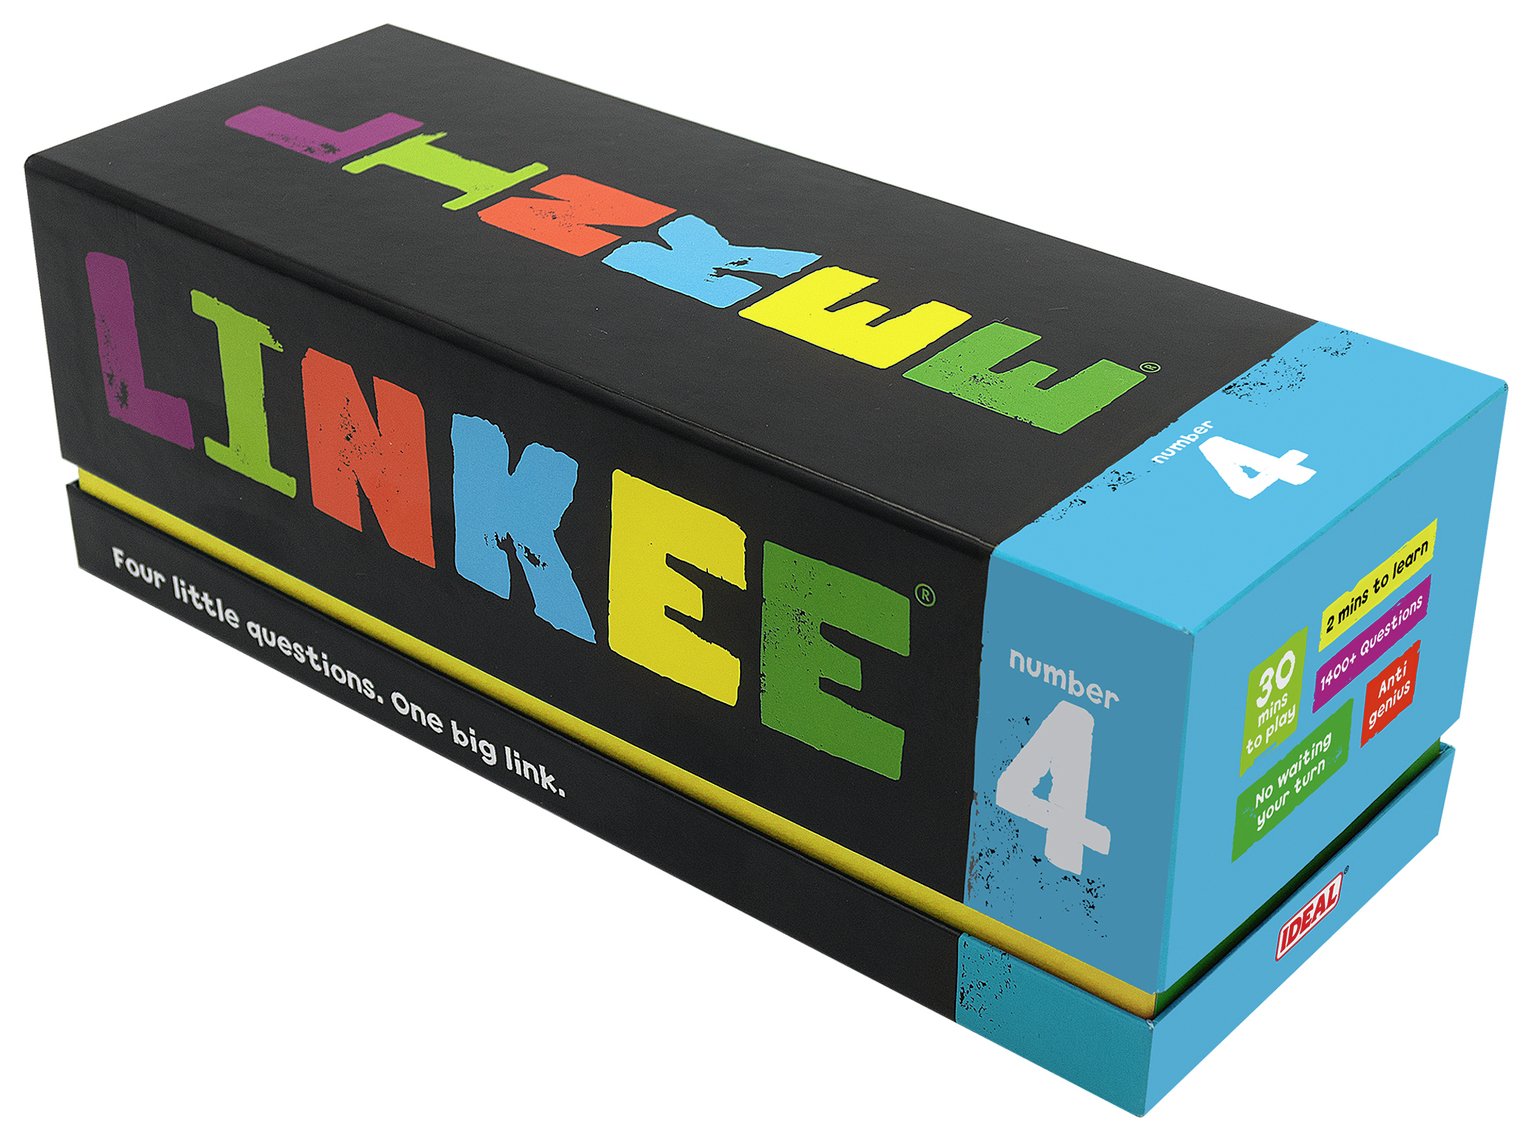 Linkee 4 Game review